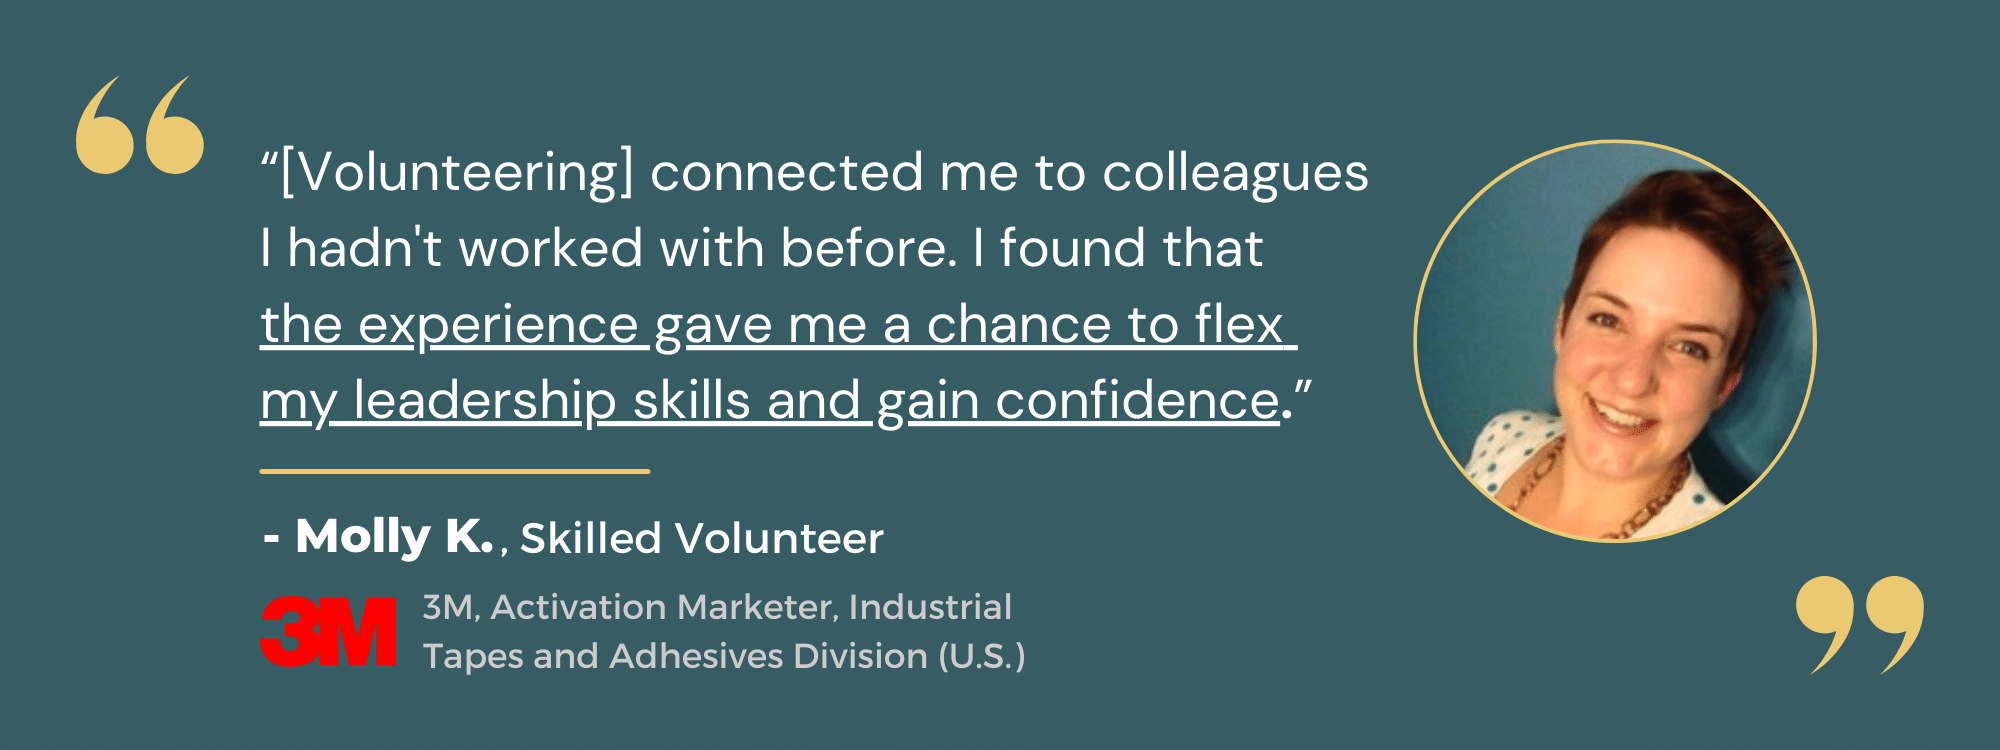 quote from Molly K. about how volunteering connected her with coworkers